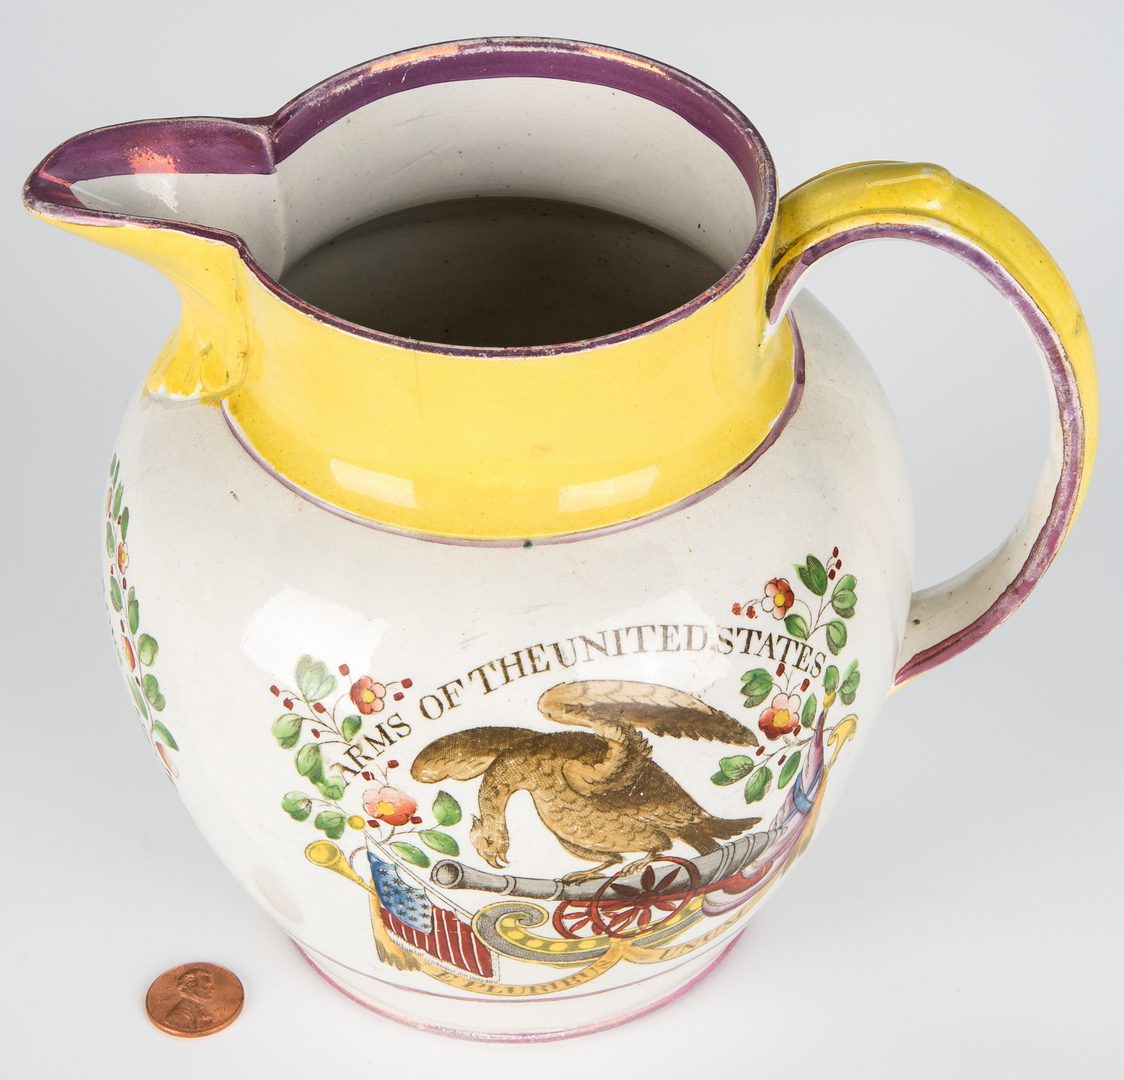 Lot 240: American Polychrome Historical Staffordshire Jug, Arms of the US